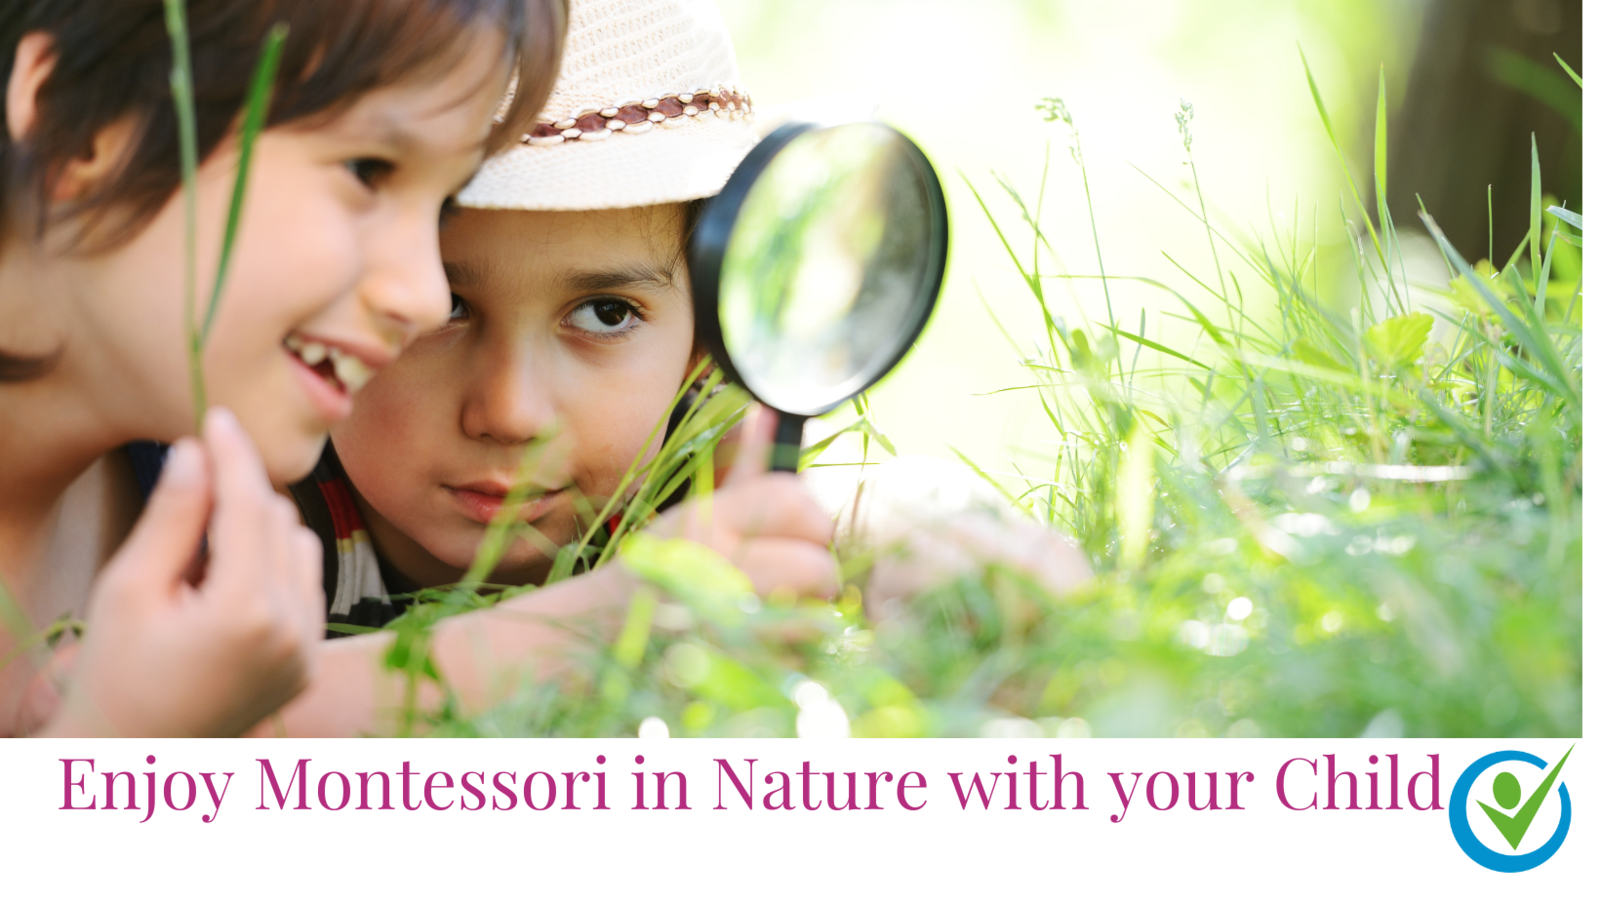 Enjoy Montessori in Nature with your child